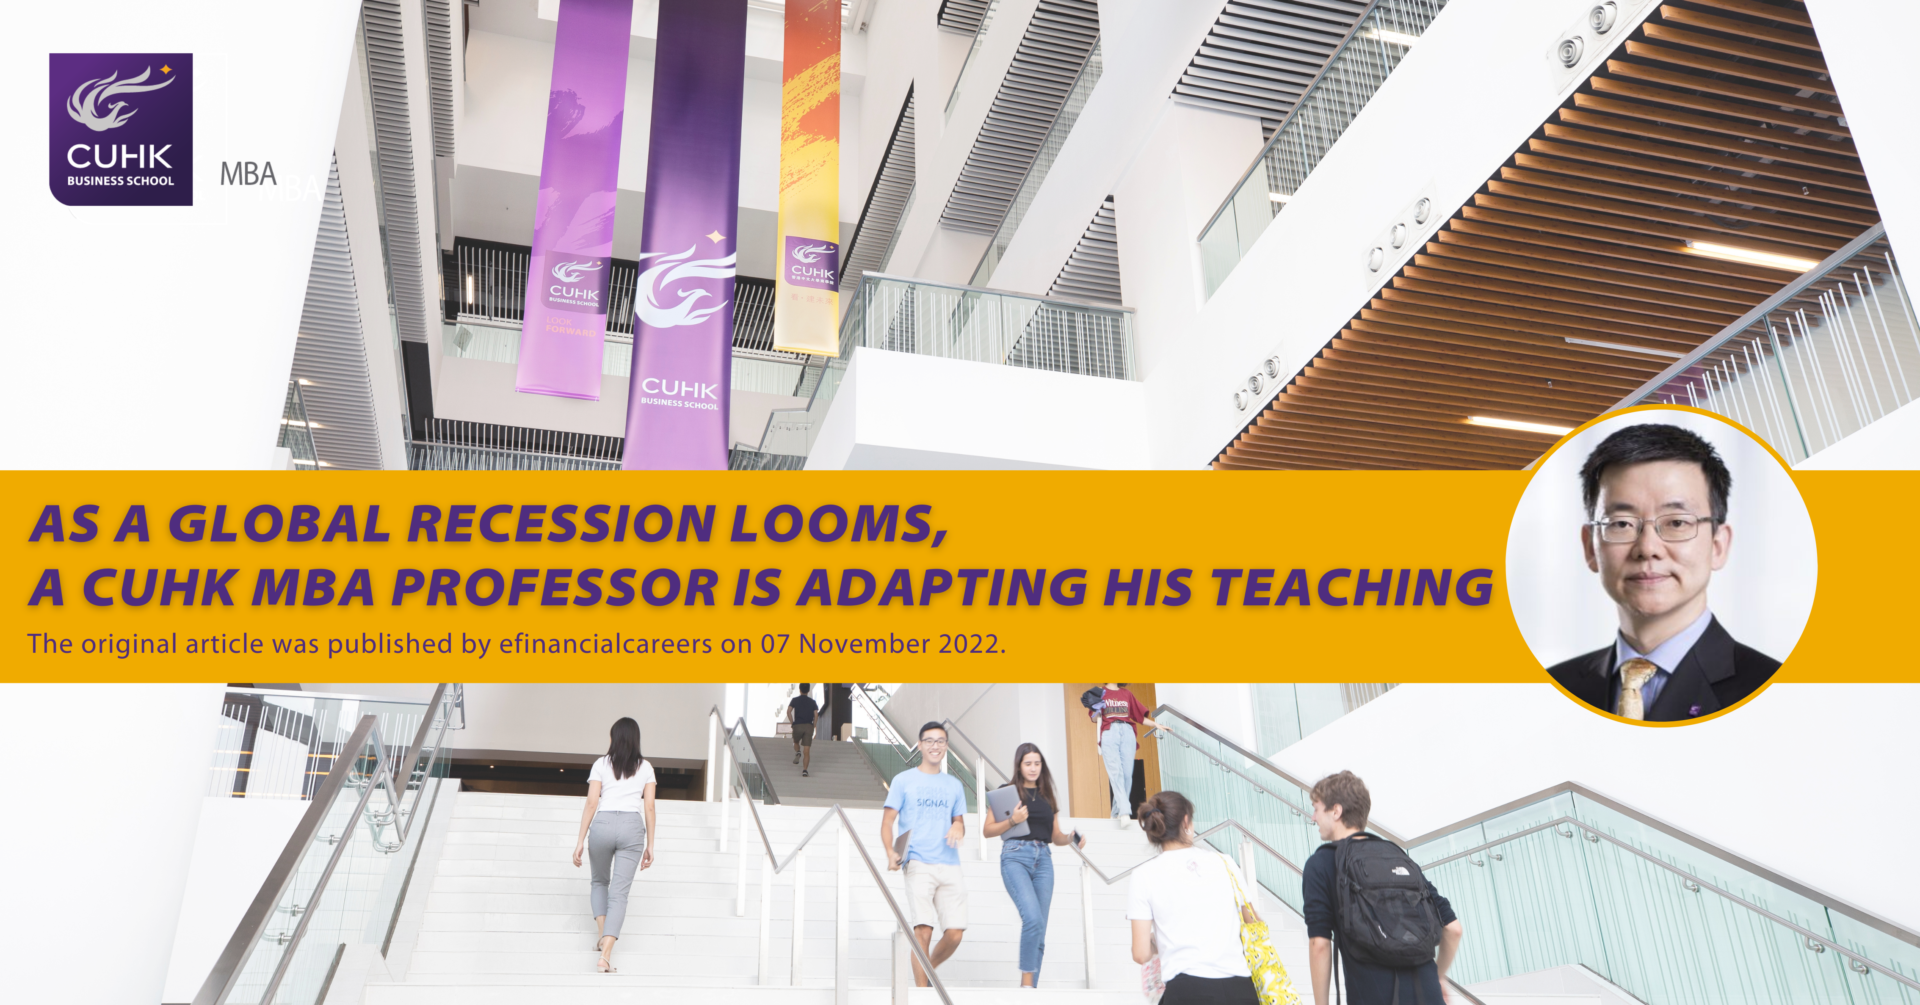 As a global recession looms, a CUHK MBA professor is adapting his teaching